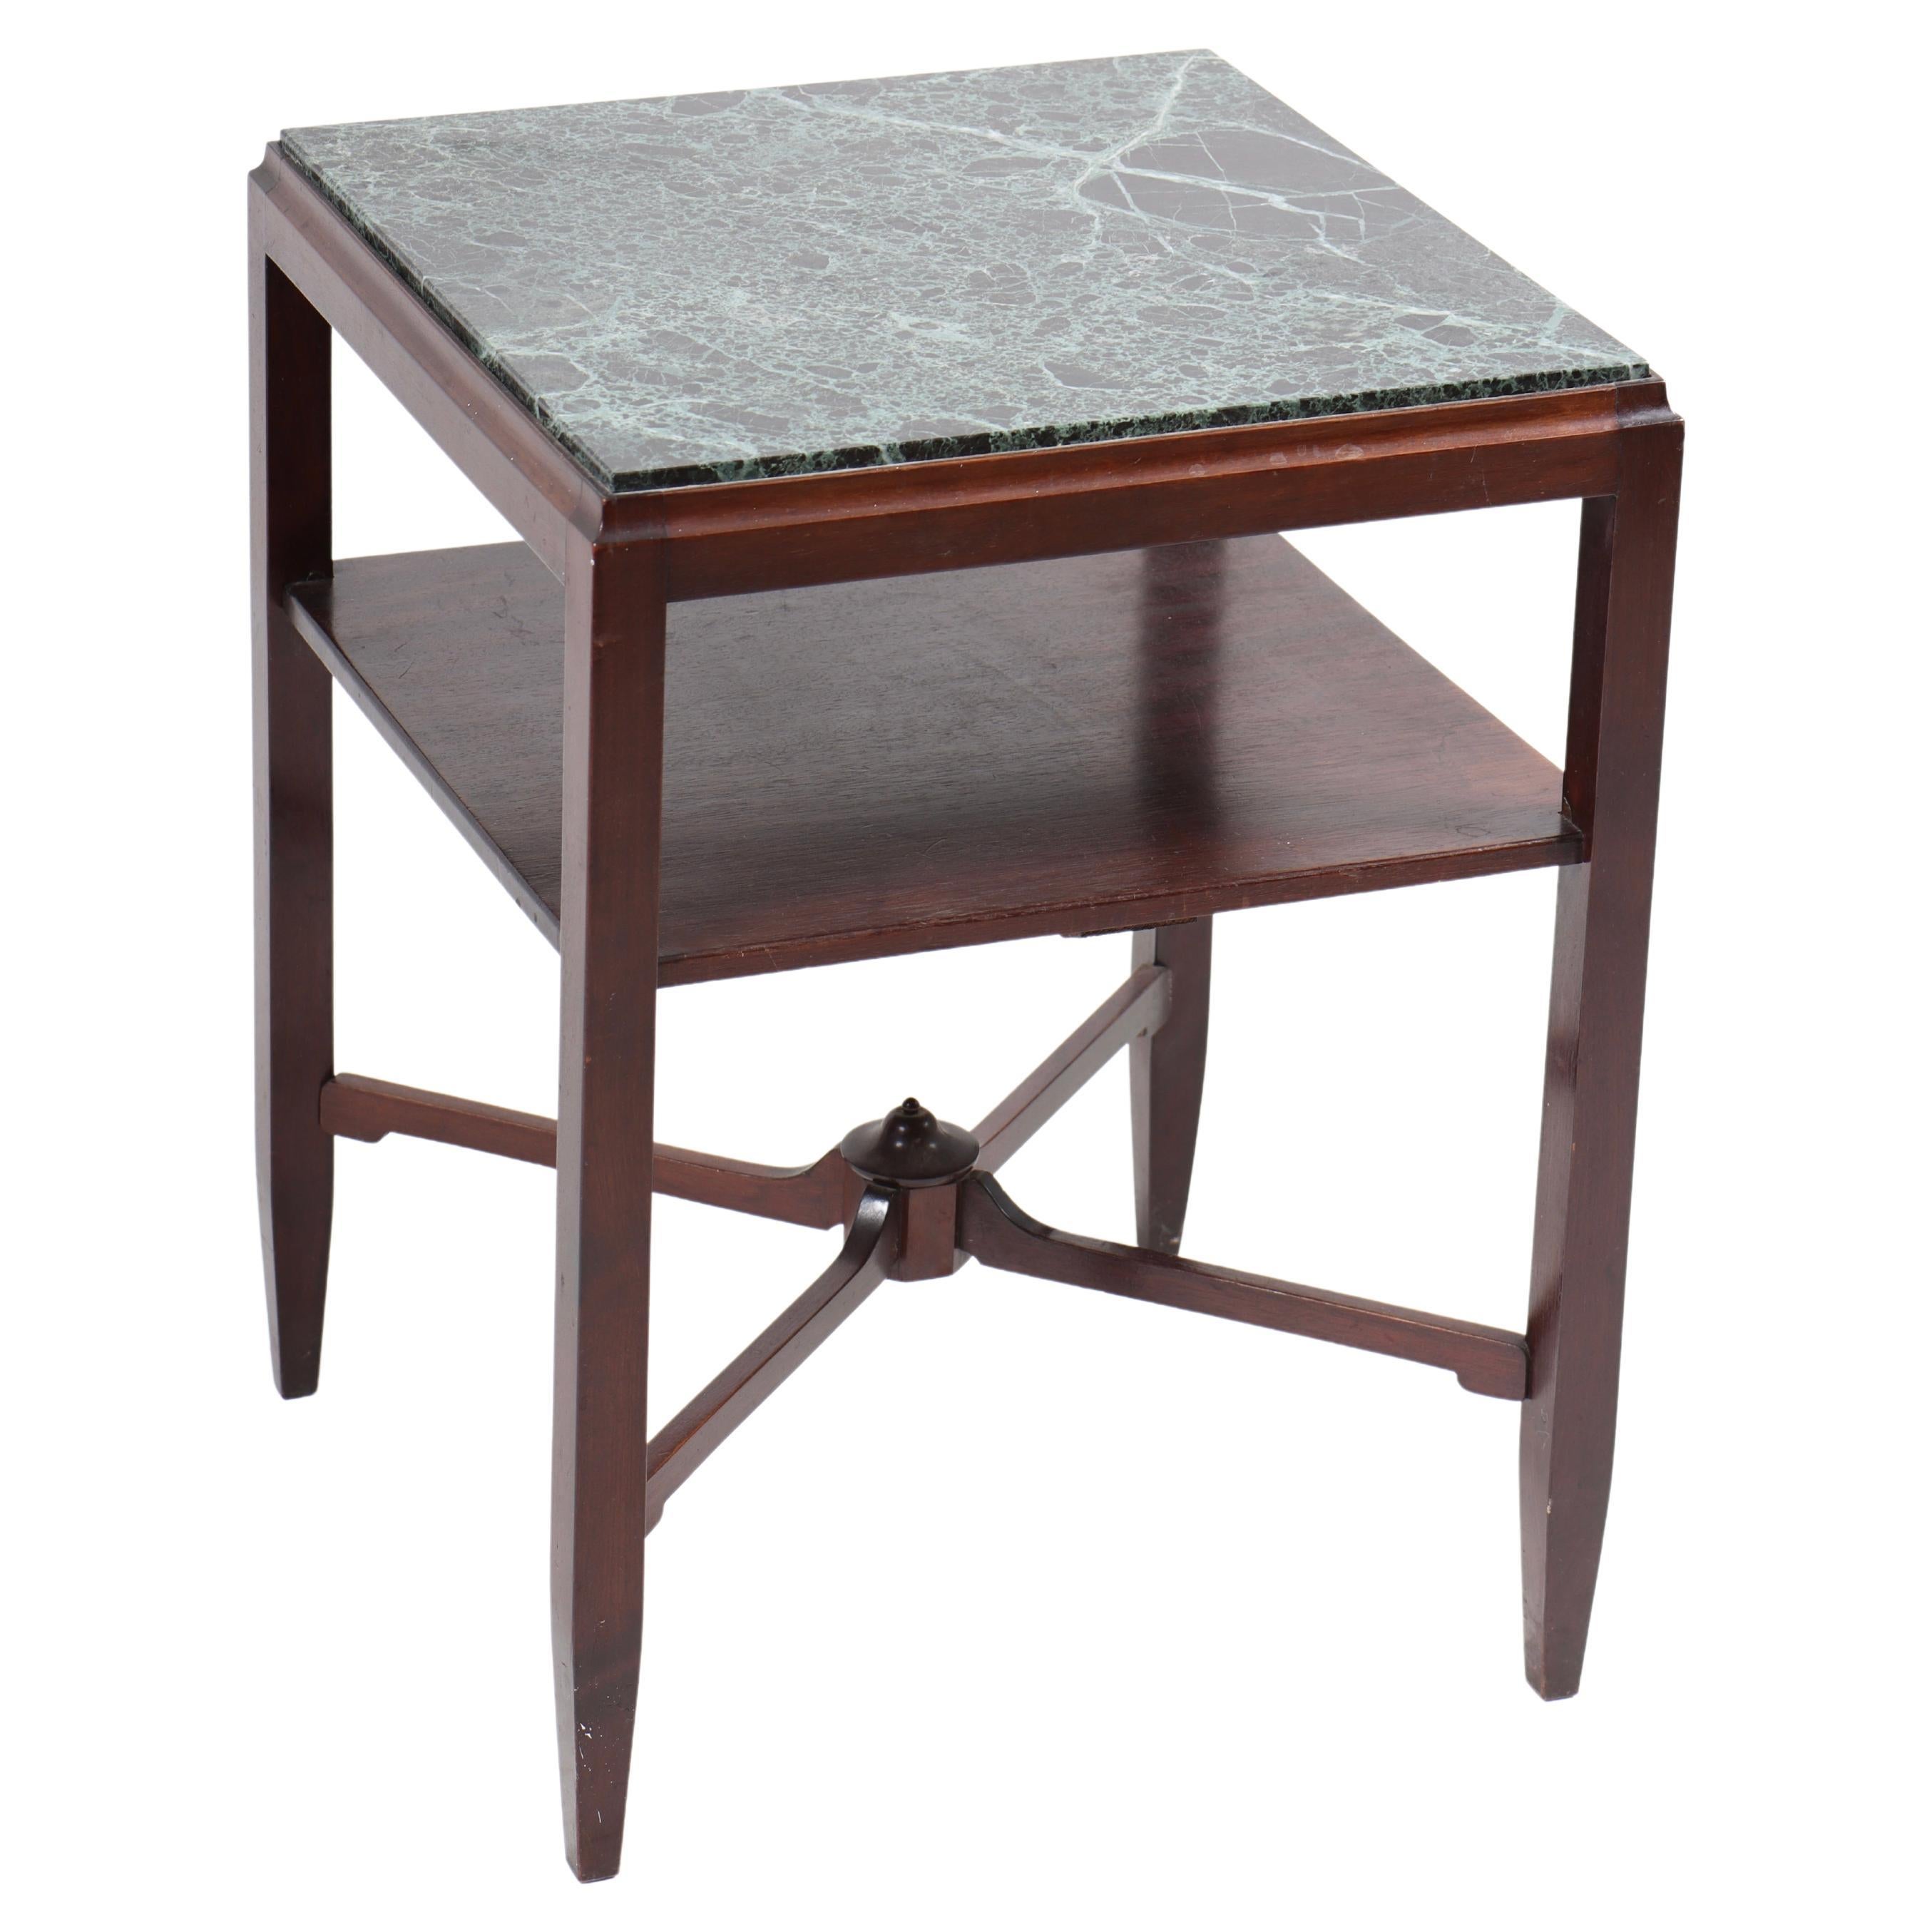 Low Table in Mahogany and Marble, Made in Denmark, 1930s For Sale